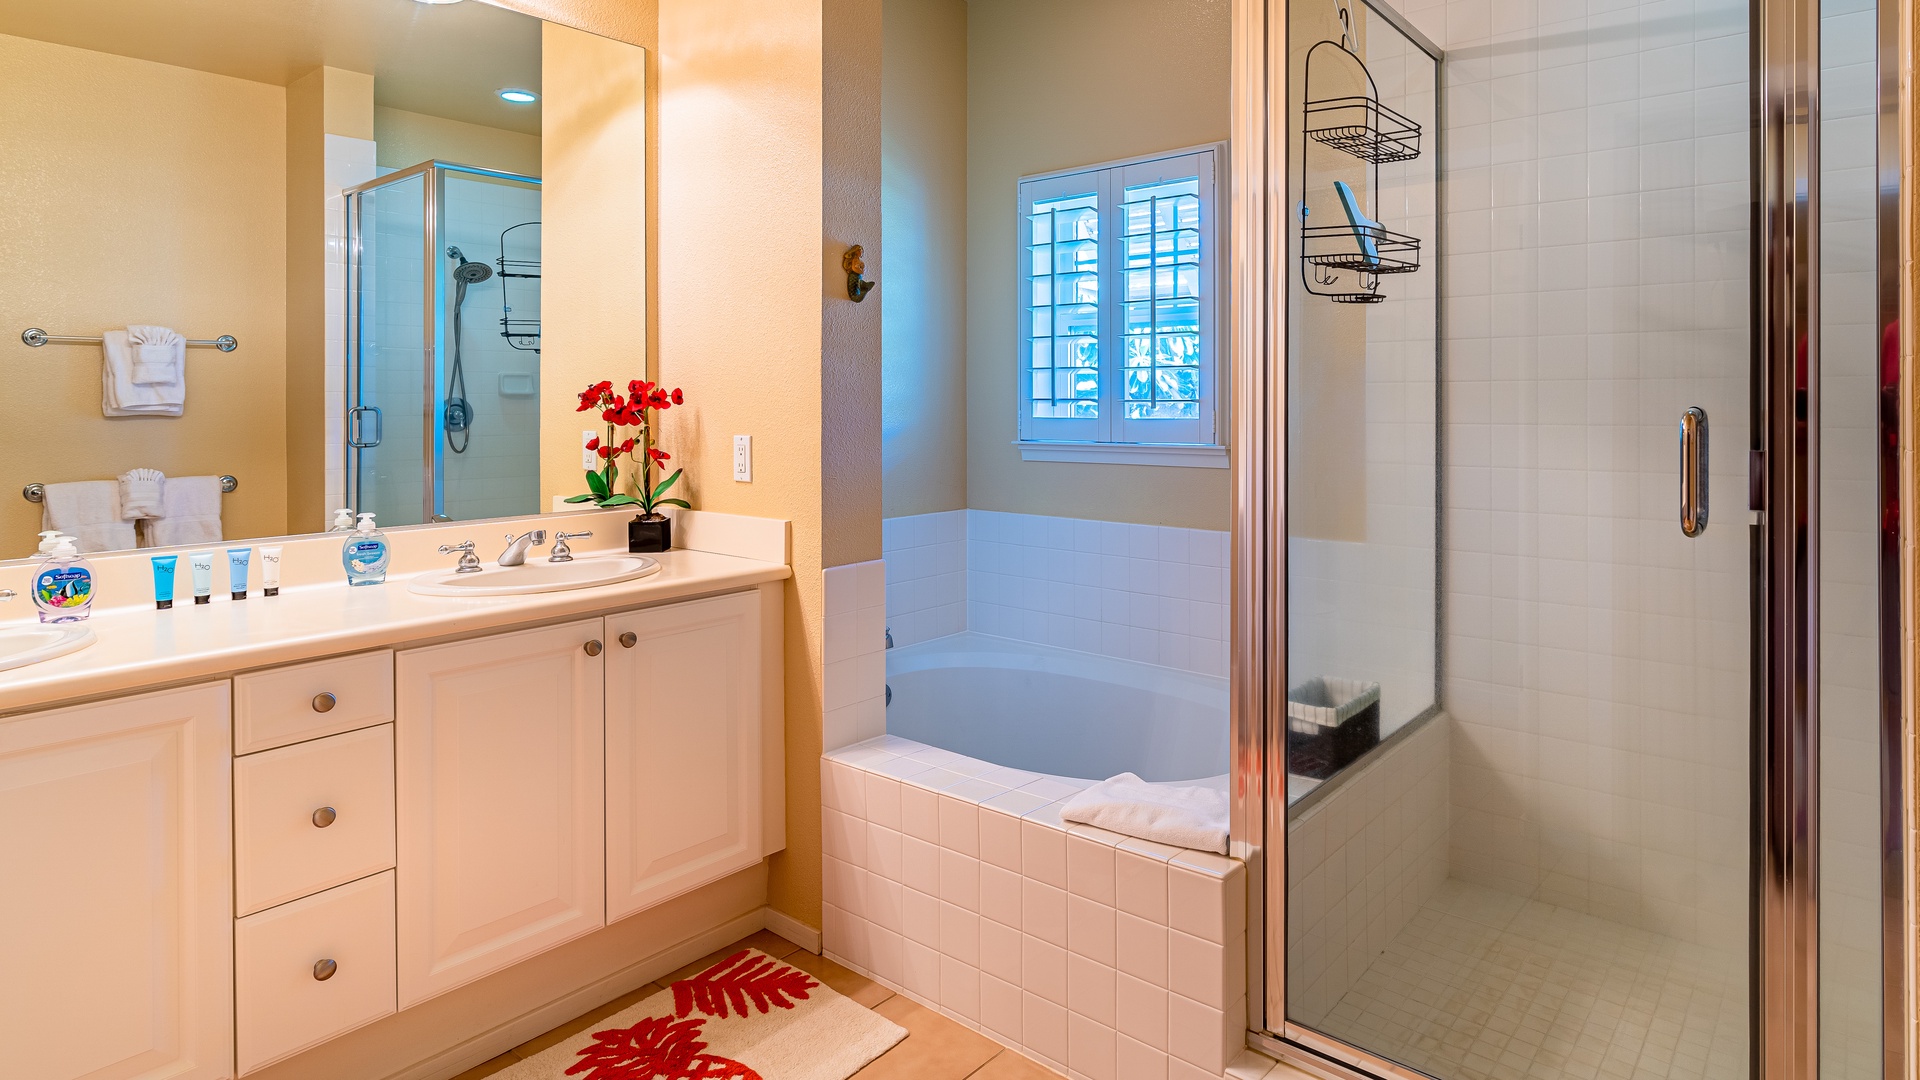 Kapolei Vacation Rentals, Coconut Plantation 1174-2 - The primary guest bathroom with a walk-in shower and tub combination.